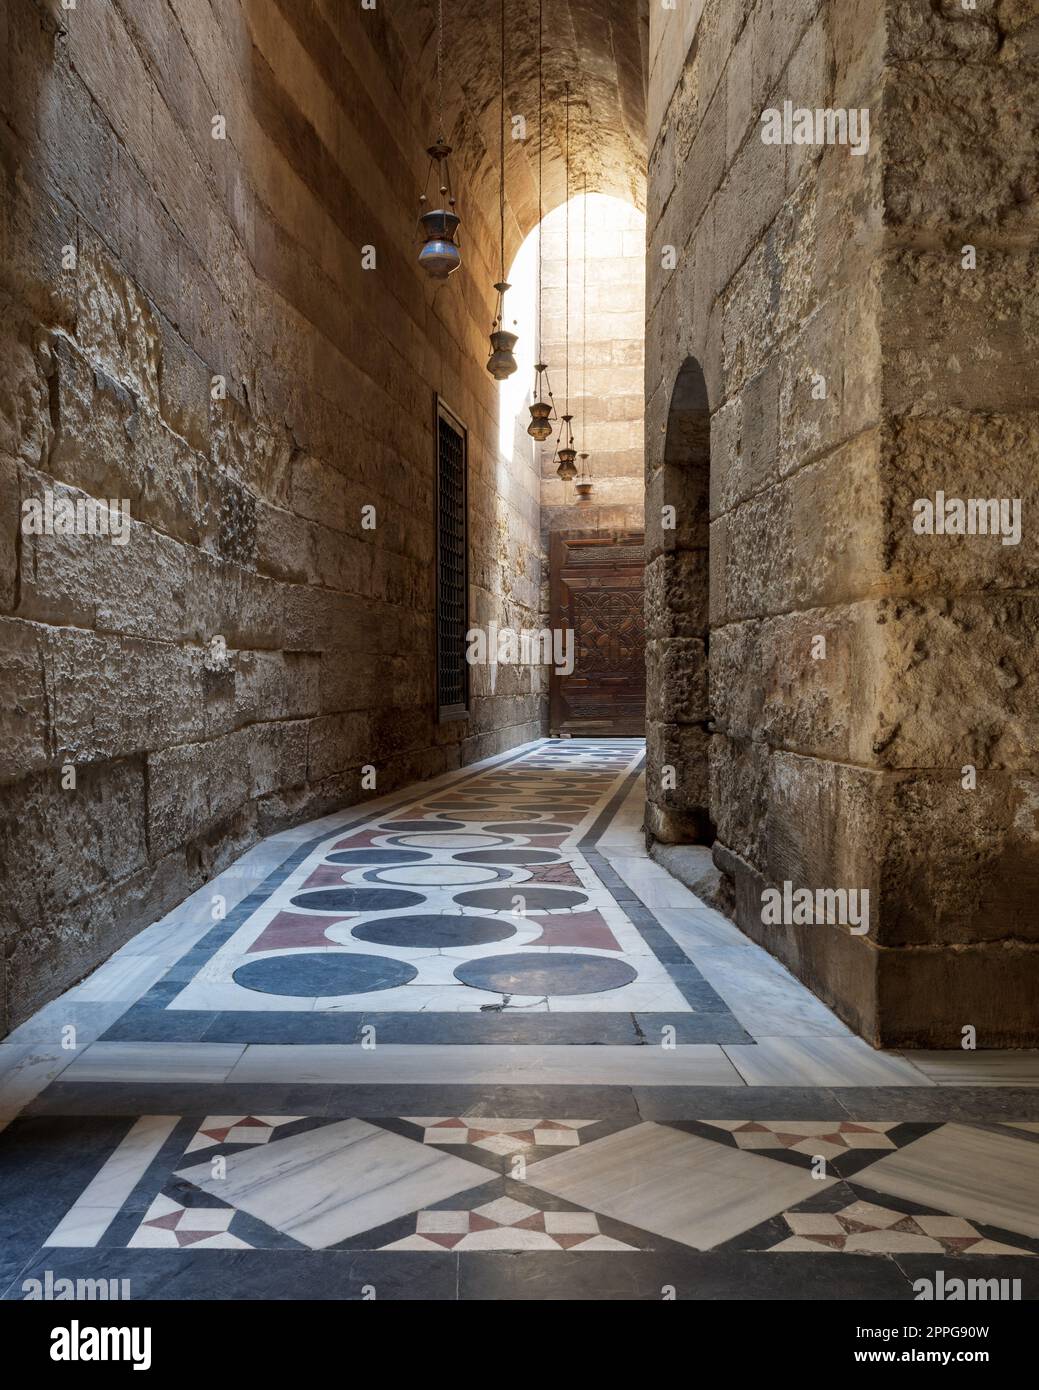 Vaulted passage leading to the Courtyard of Sultan Qalawun mosque with colorful marble floor, Cairo Stock Photo